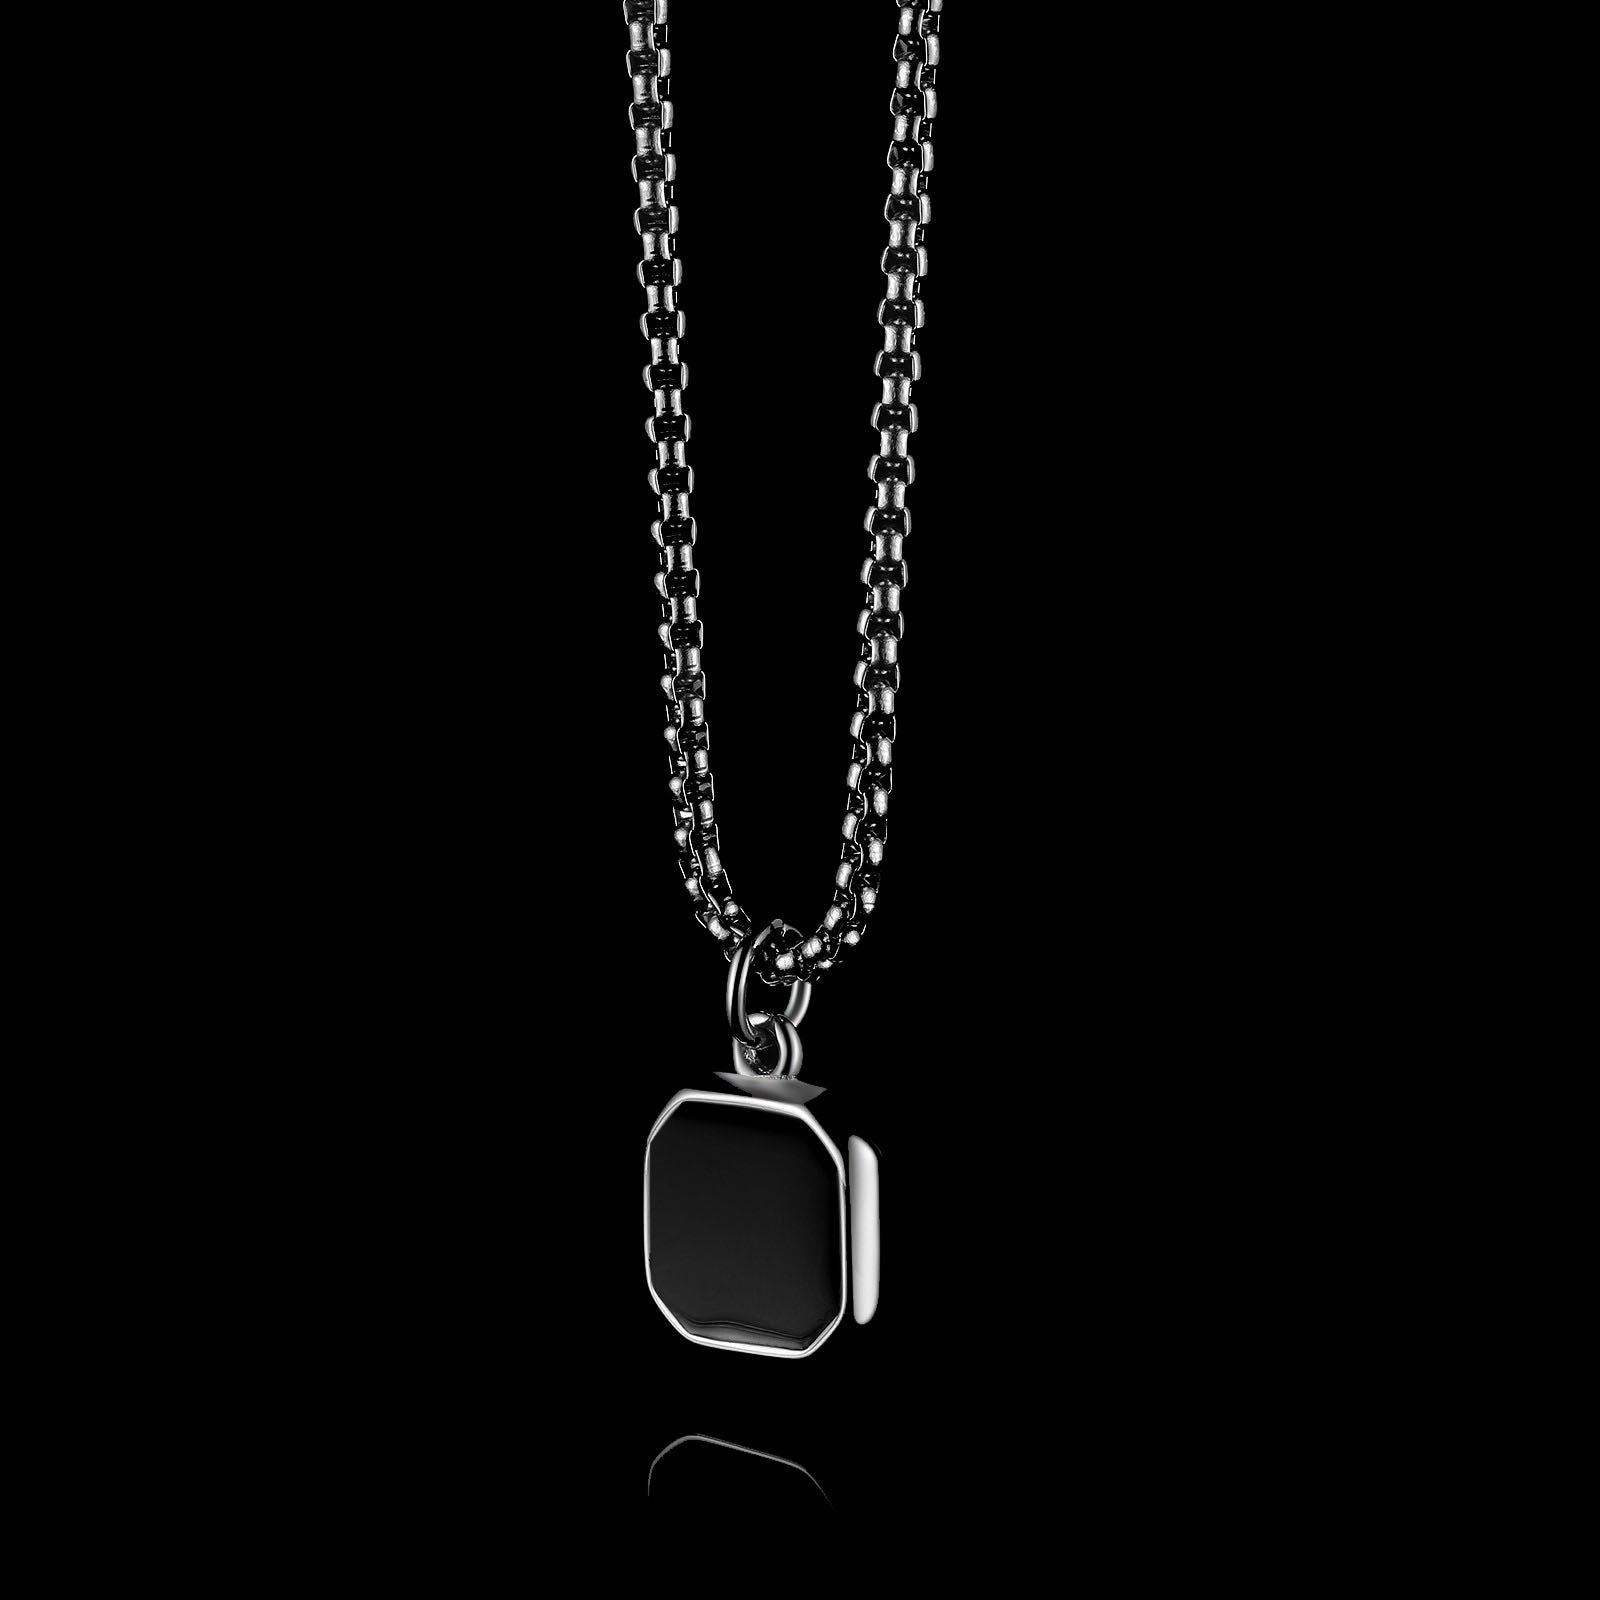 THE ONYX BADGE. - NECKLACE